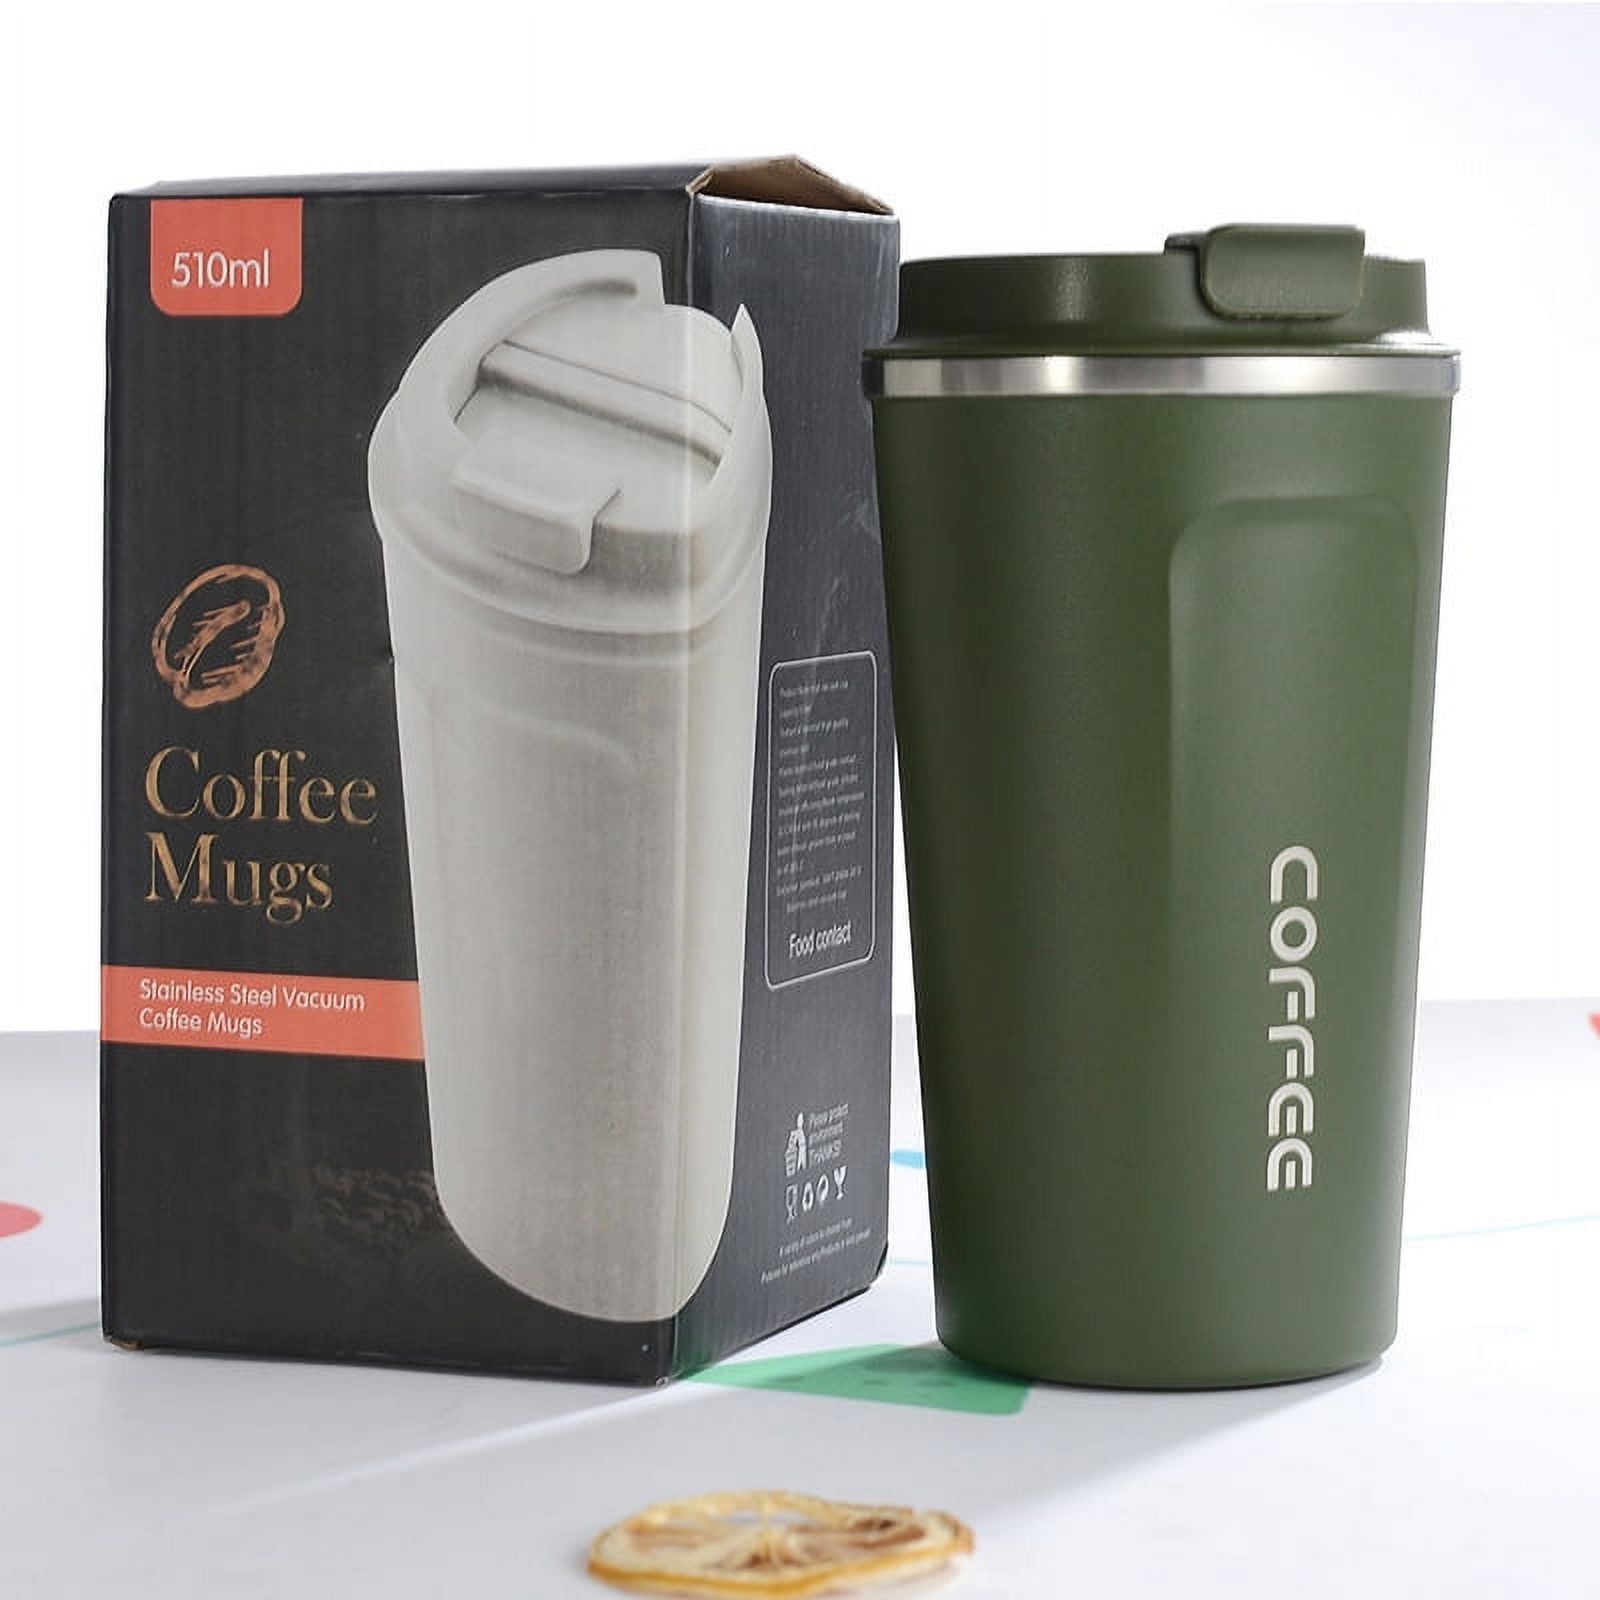 510ml Travel Mug - Insulated Coffee Cup with Filter Cup Holder Leakproof  Lid - Stainless Steel Trave…See more 510ml Travel Mug - Insulated Coffee  Cup